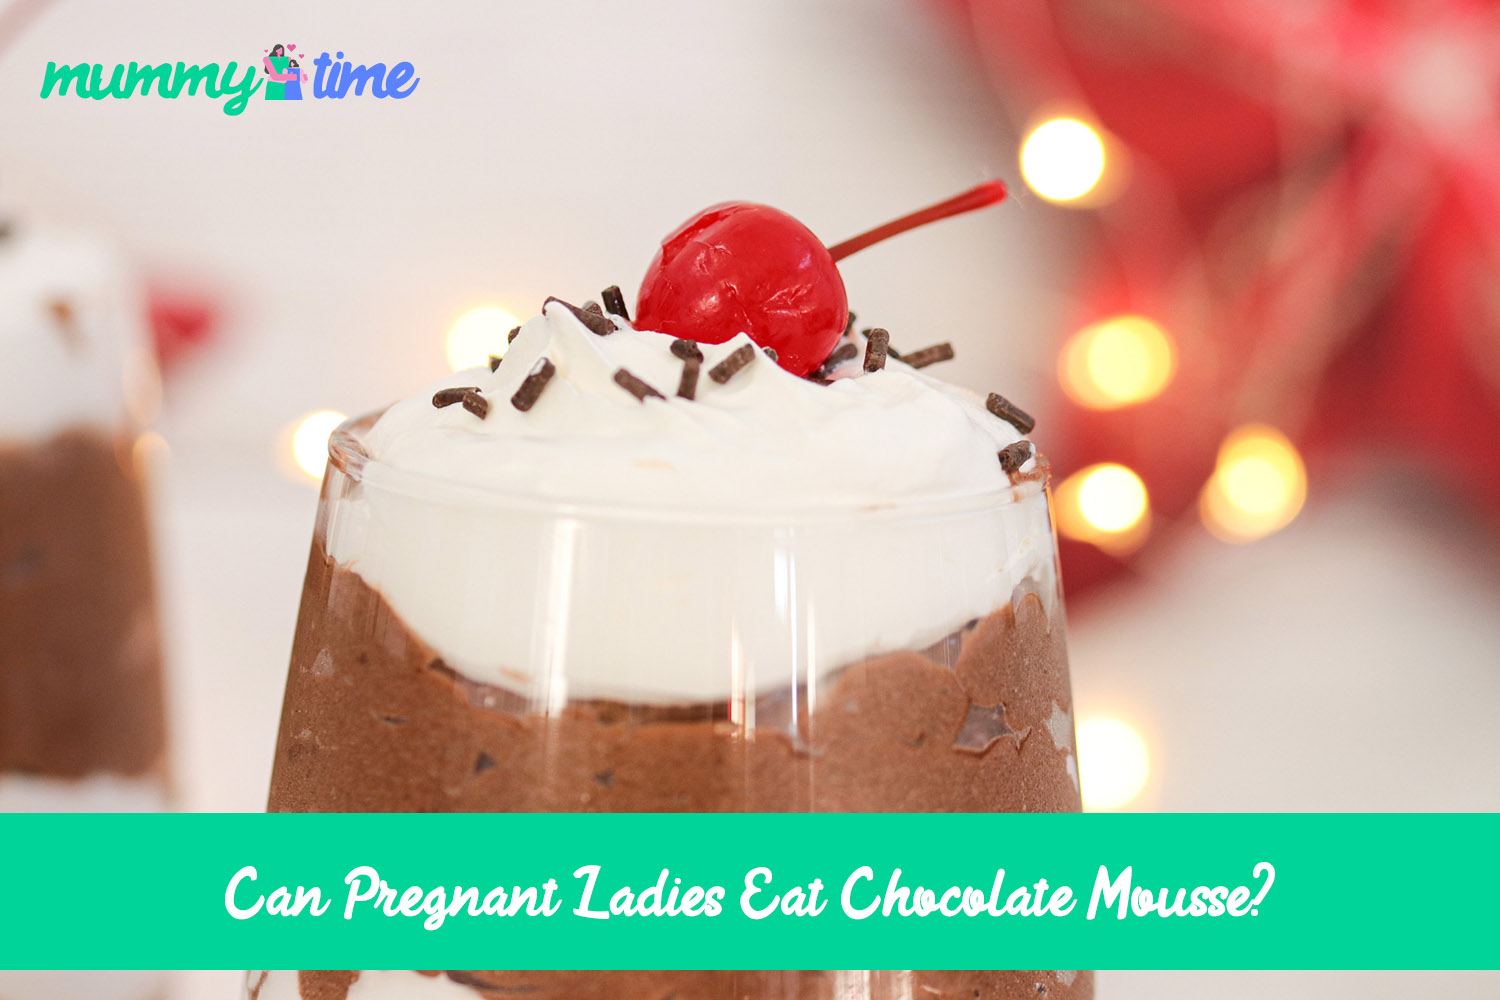 Can Pregnant Ladies Eat Chocolate Mousse?